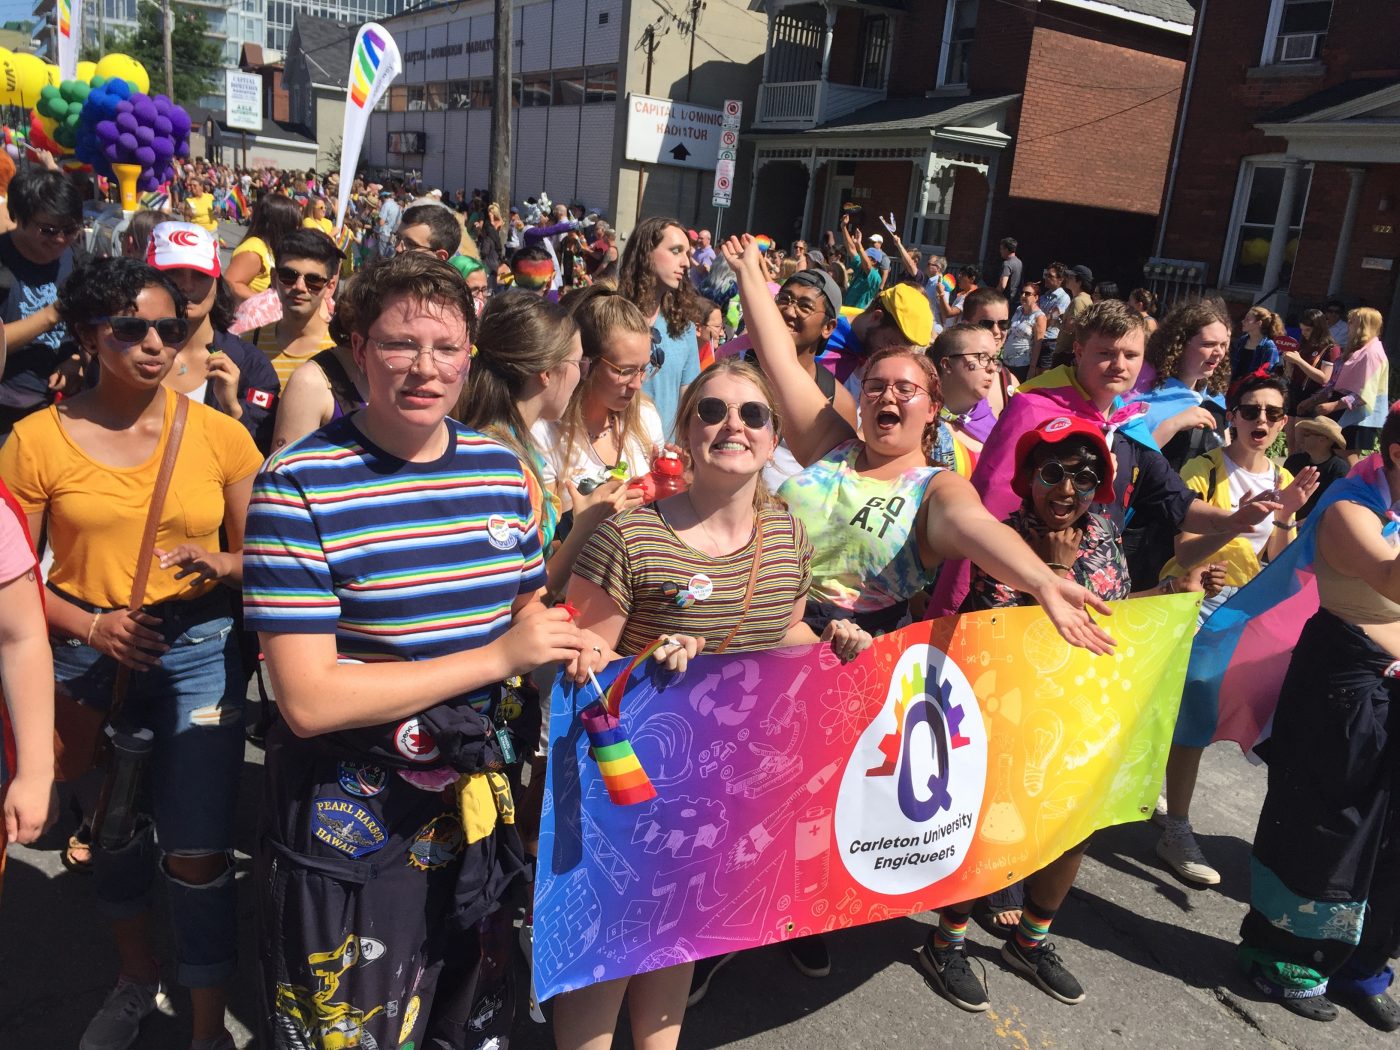 Carleton University Engiqueers group at Capital Pride parade.